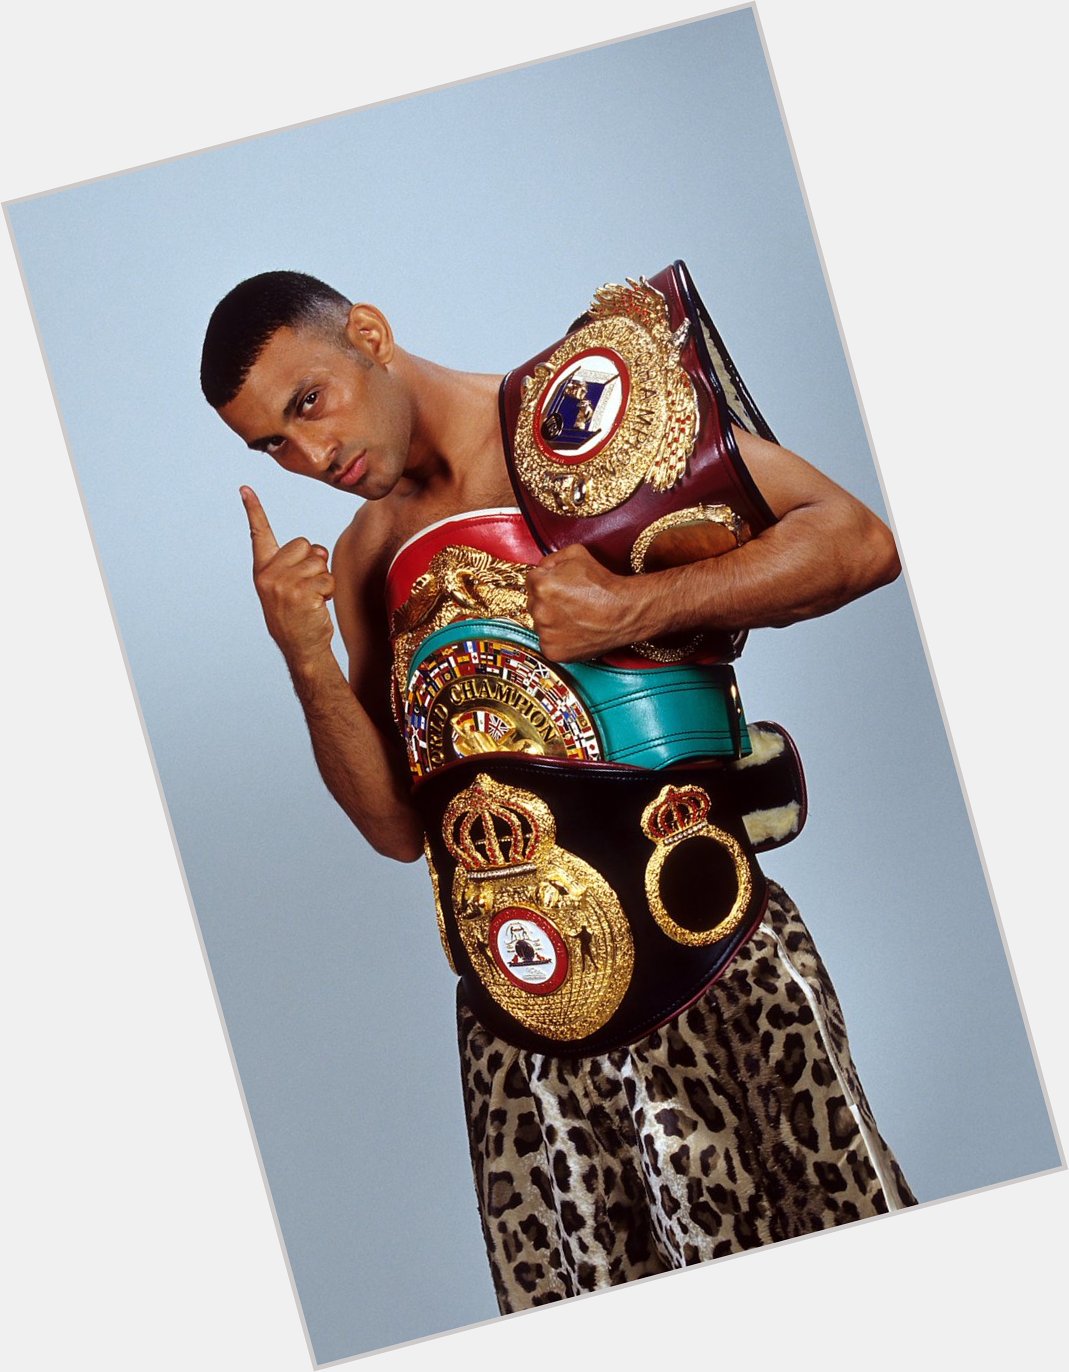 Happy Birthday to Prince Naseem Hamed! One of the most entertaining fighters ever. 